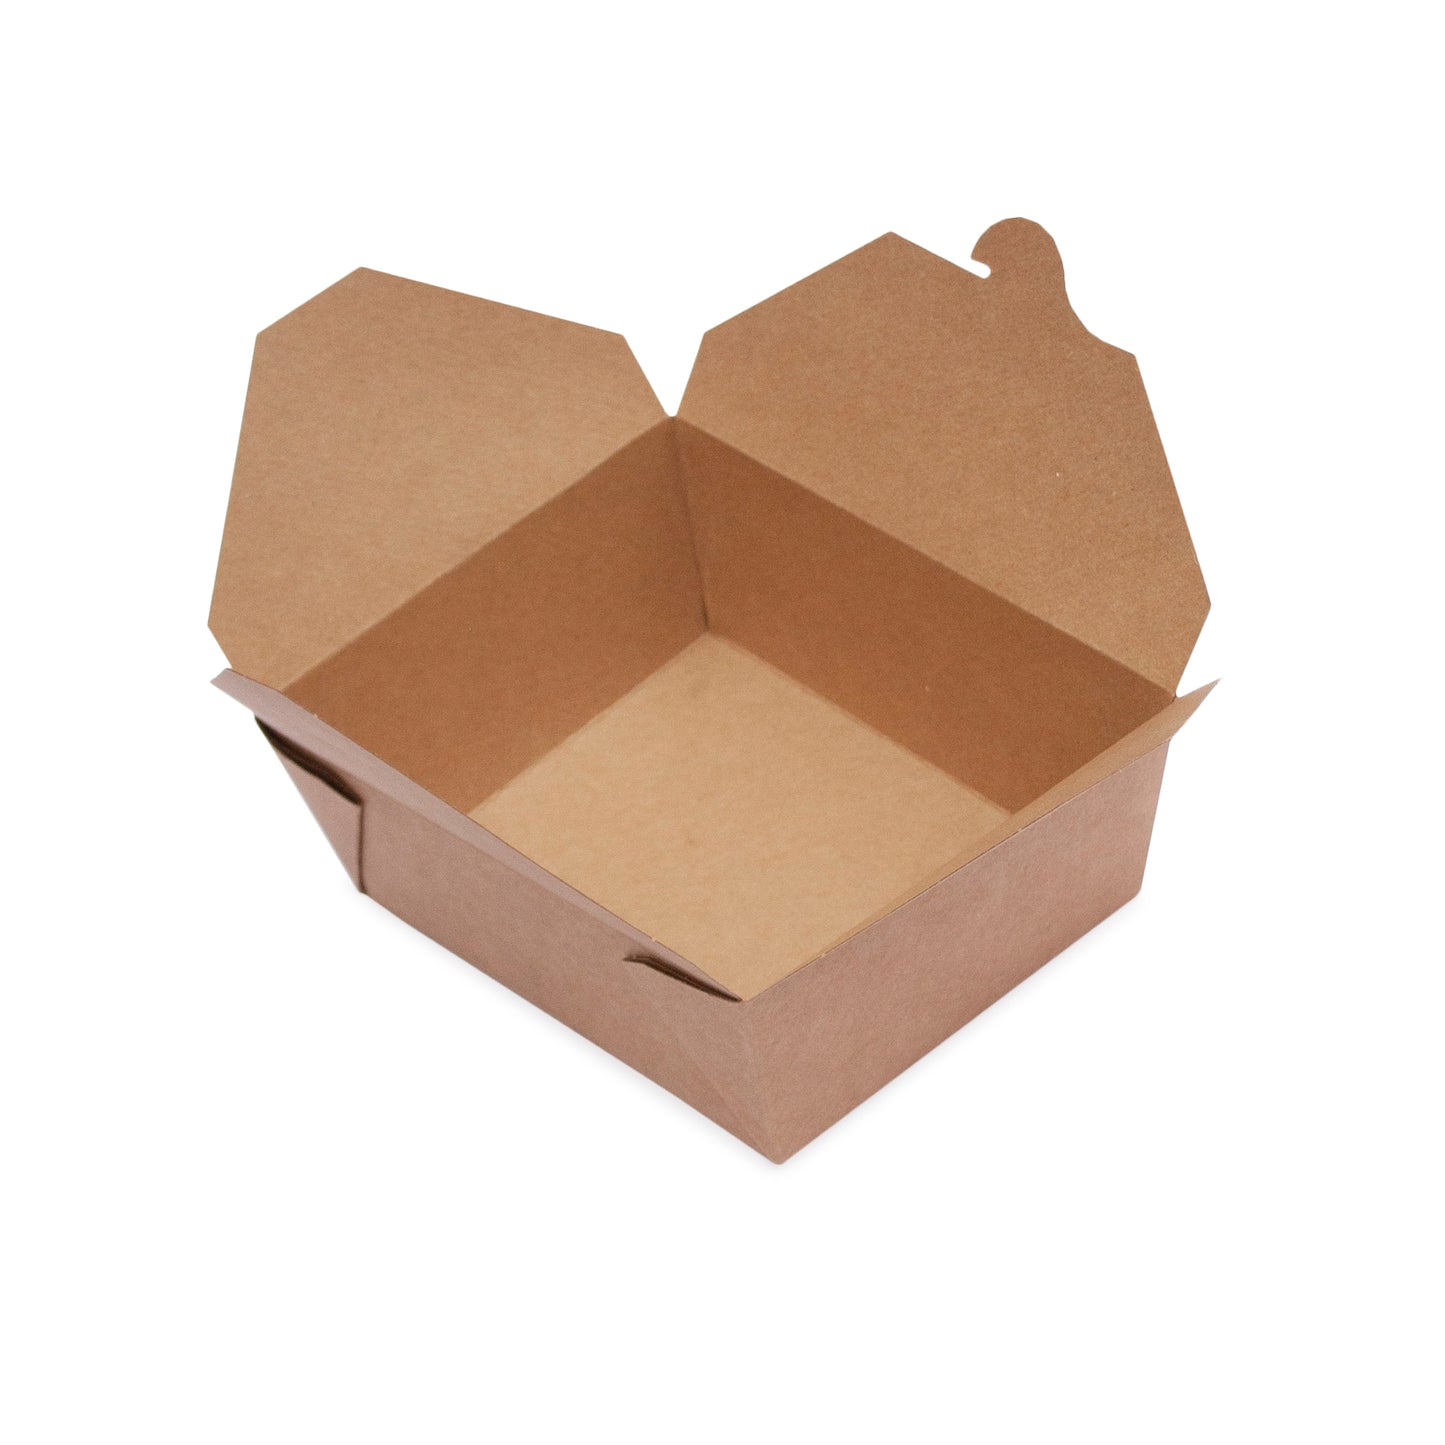 Leakproof food container No.5 kraft food-to-go carton 150 units, 1050ml (15.2 x 12.1 x 5cm)